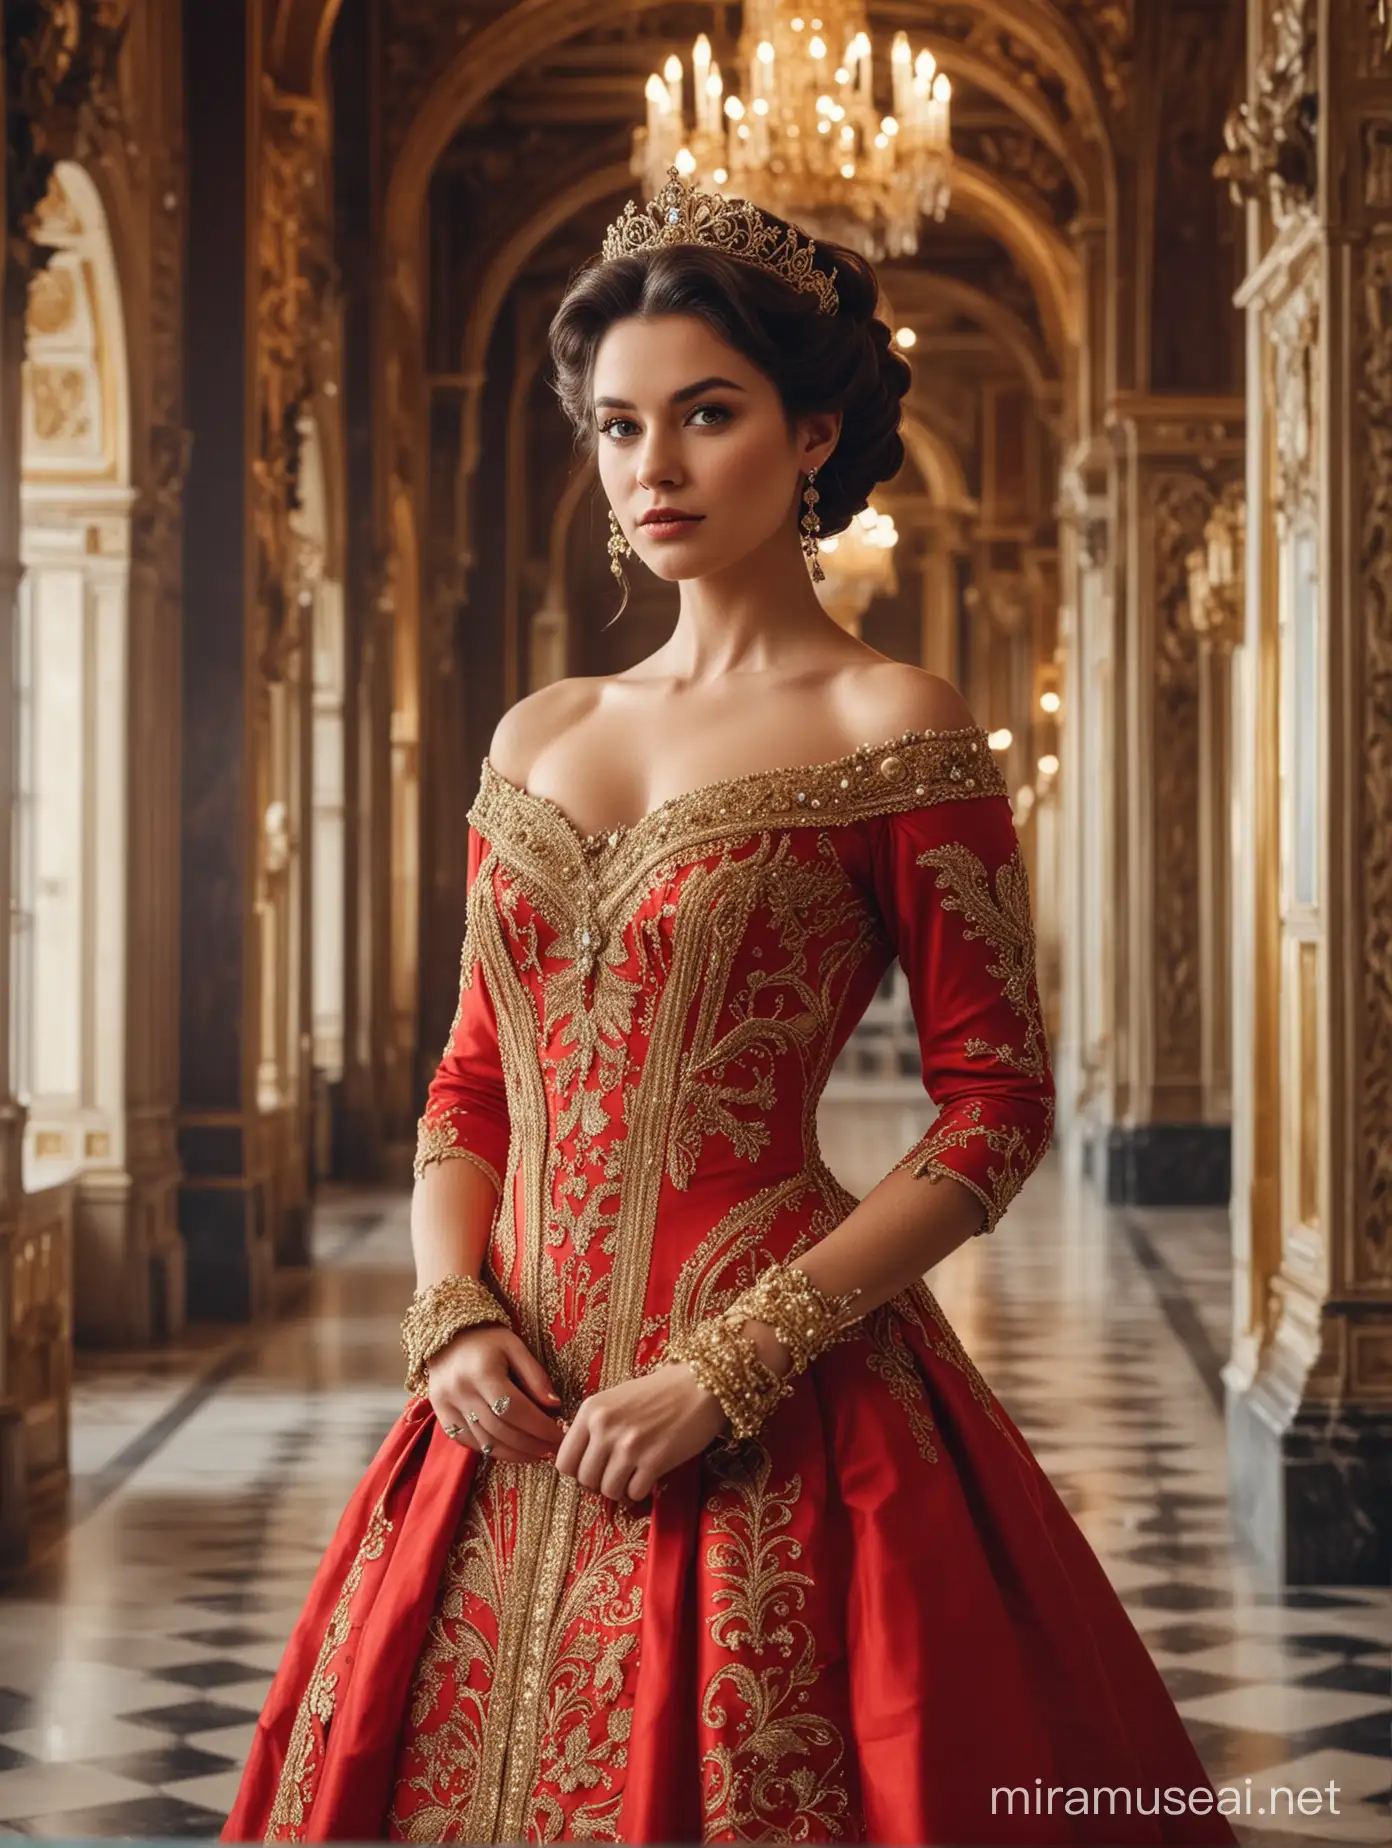 Beautiful and gorgeous queen with dark brown hairstyle in red and golden dress standing inside palace 